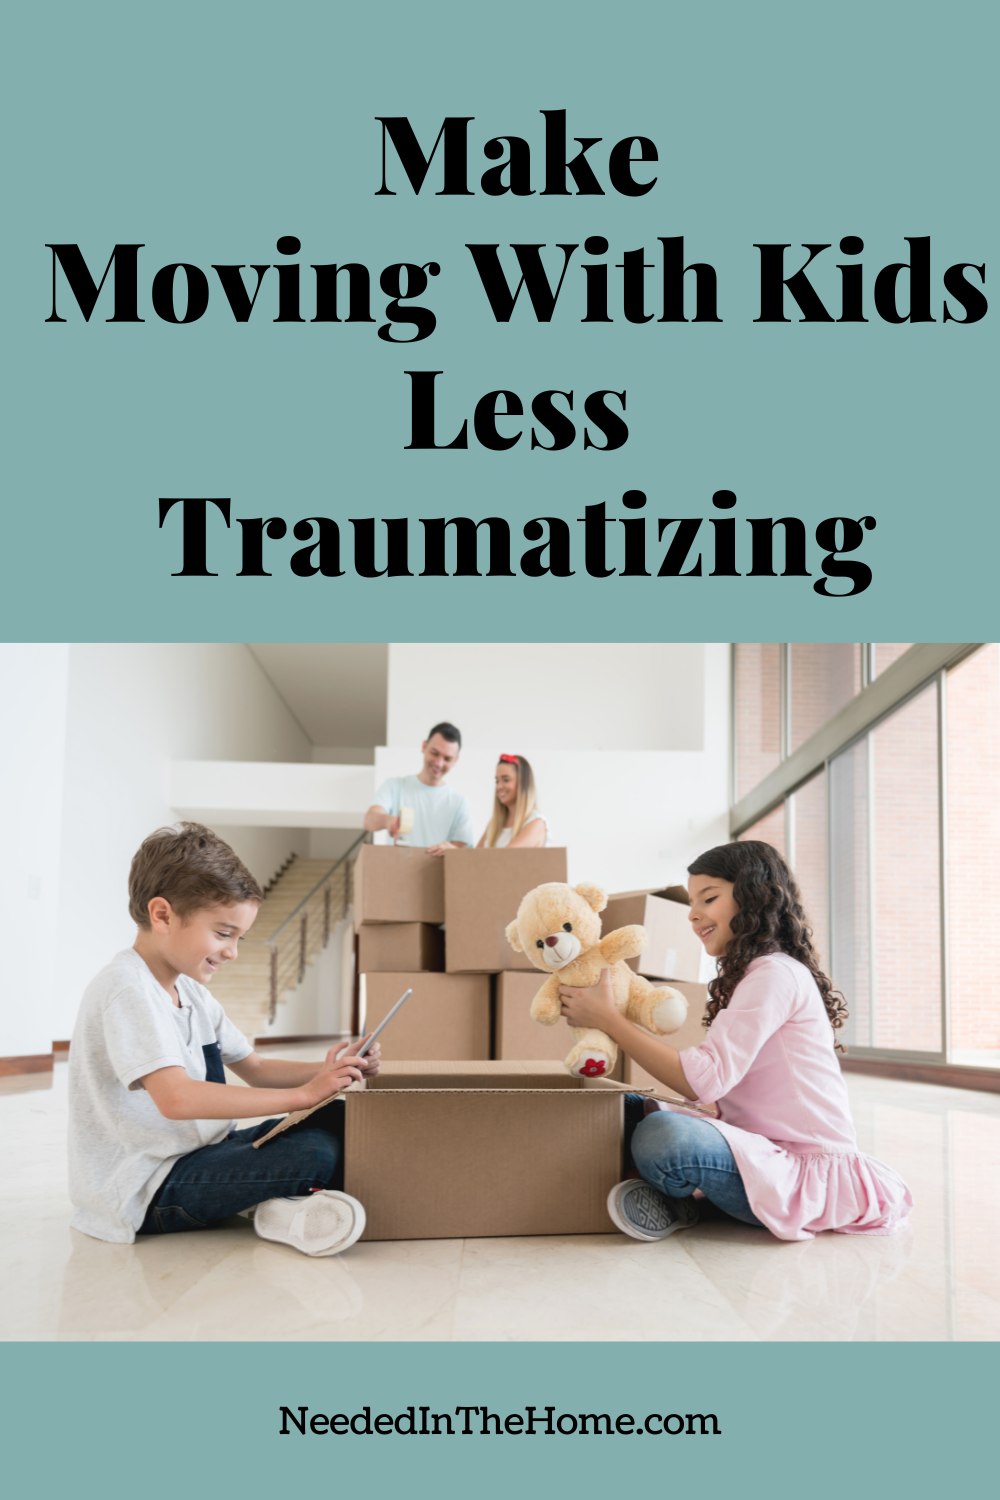 pinterest-pin-description make moving with kids less traumatizing family moving boxes teddy bear neededinthehome